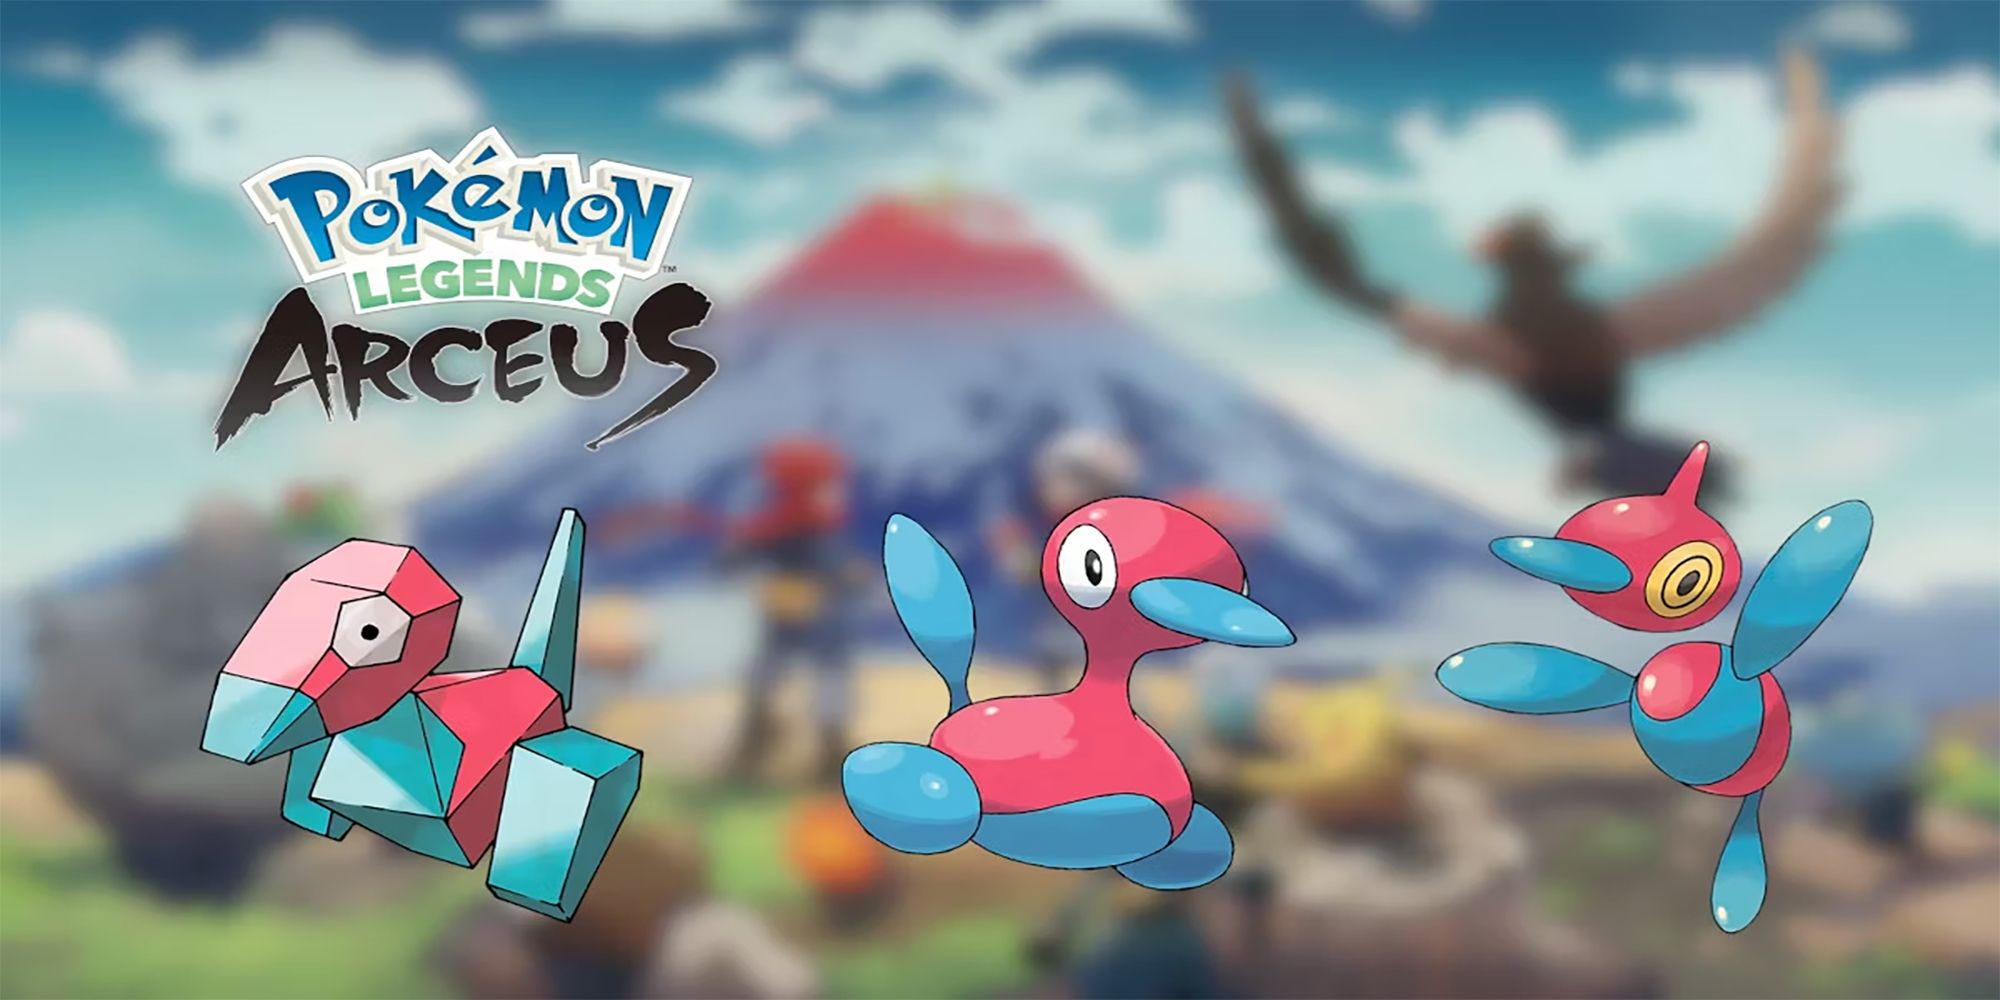 How To Evolve Porygon Into Porygon2 And PorygonZ In Pokemon Legends Arceus Featured